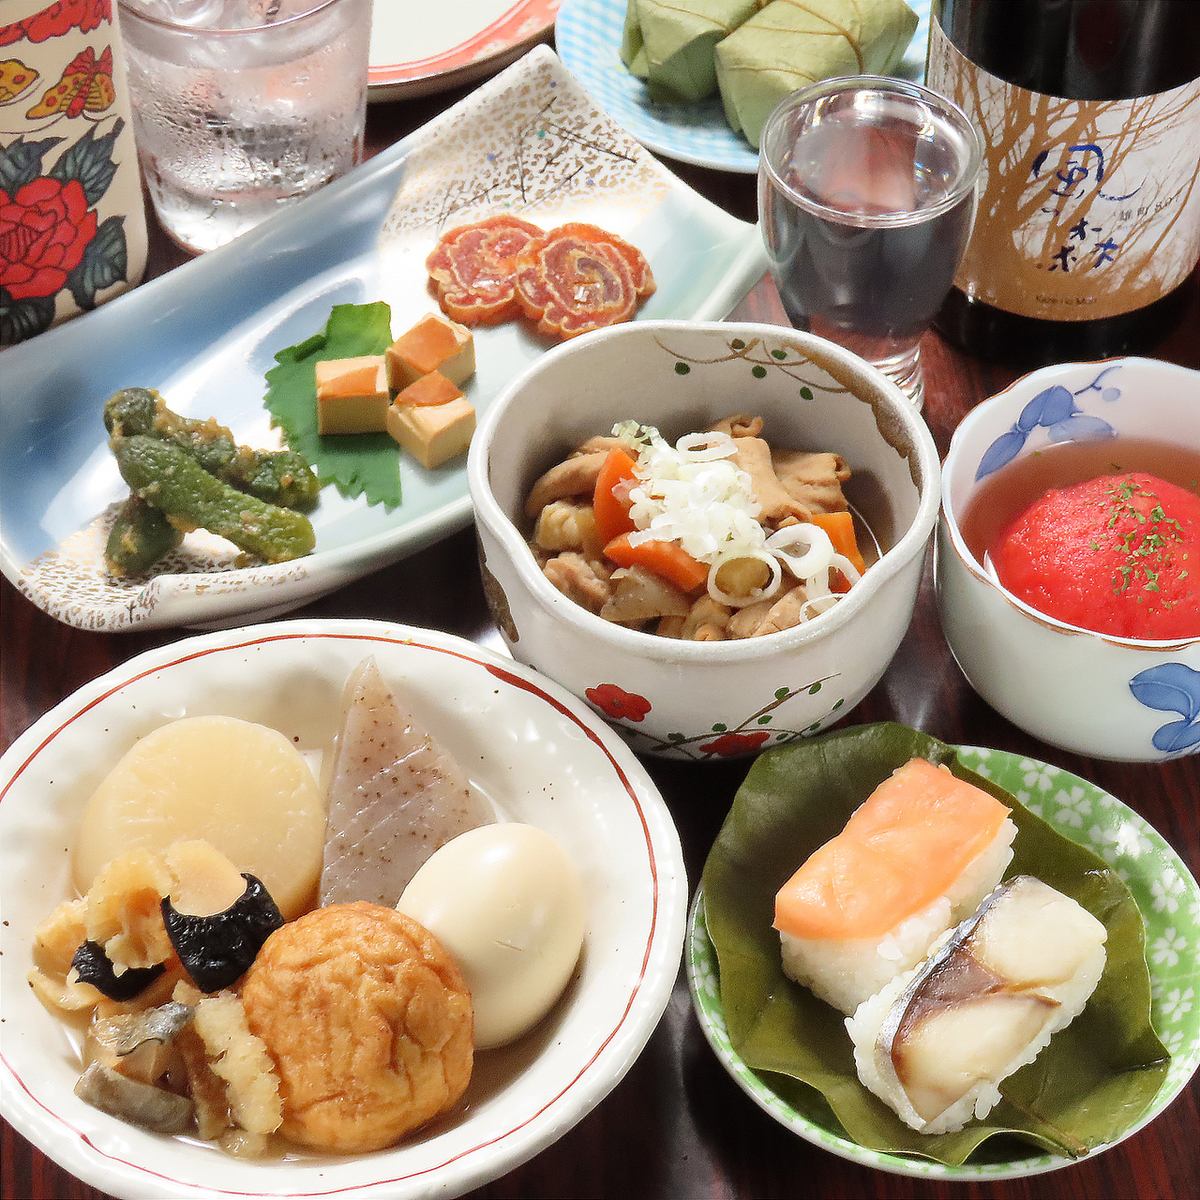 Space, sake, and food carefully selected by the landlady.You can enjoy it even by yourself♪